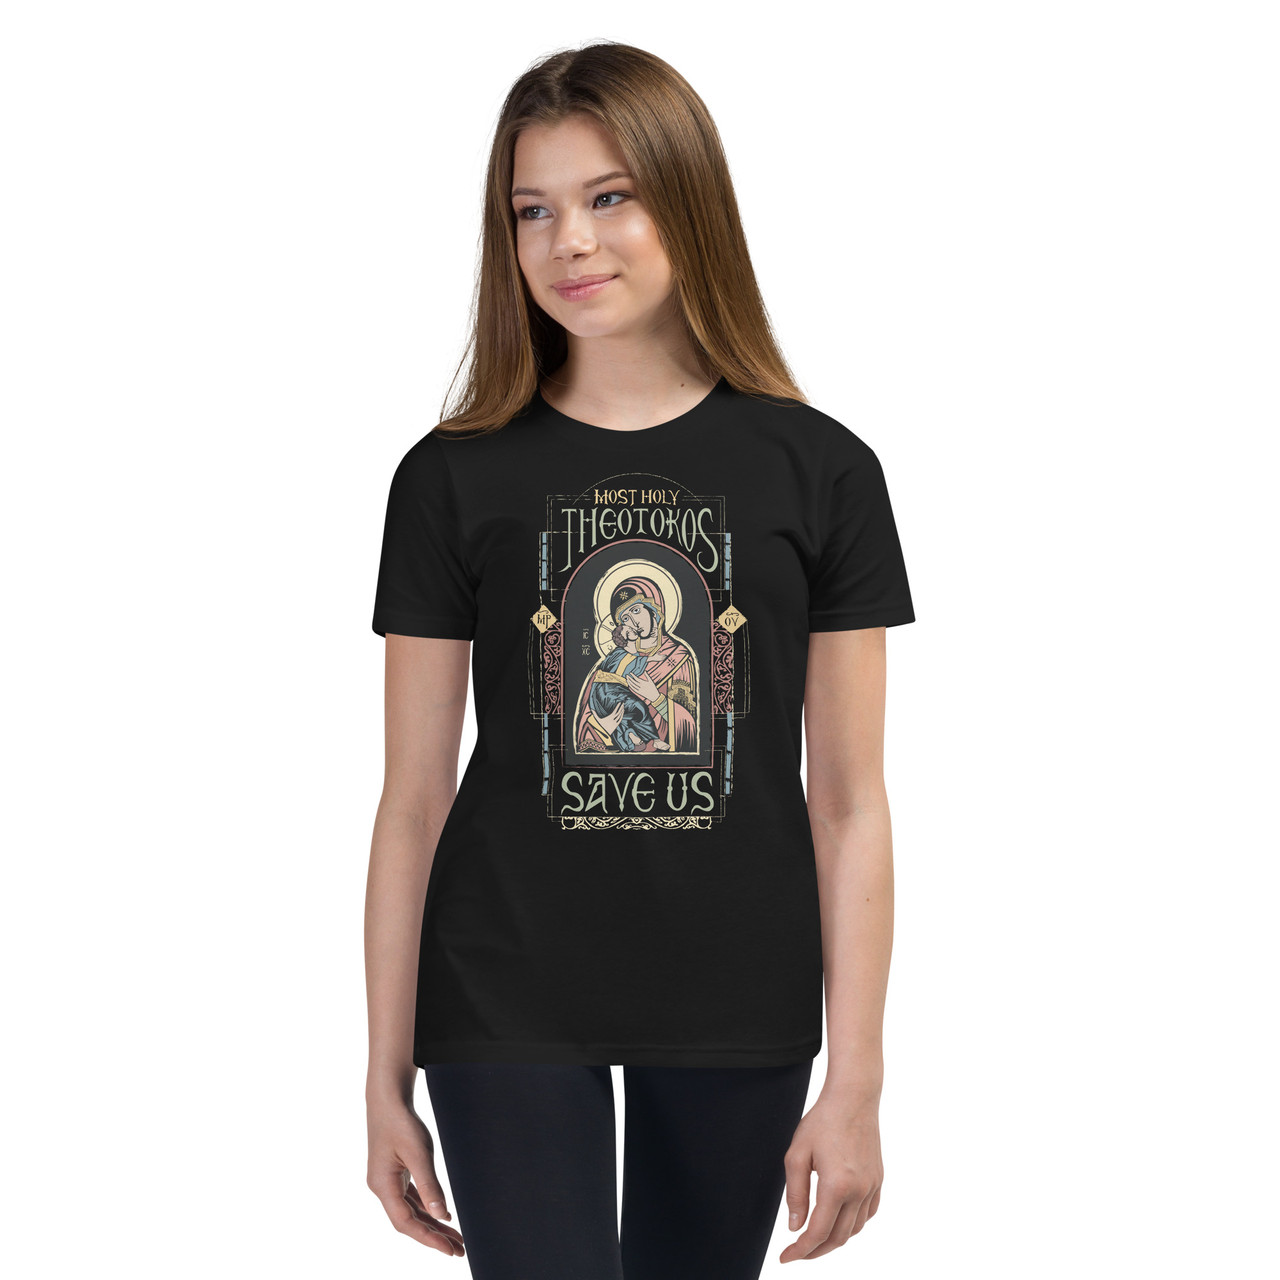 Most Holy Theotokos Save Us – Youth's T-shirt - Uncut Mountain Supply